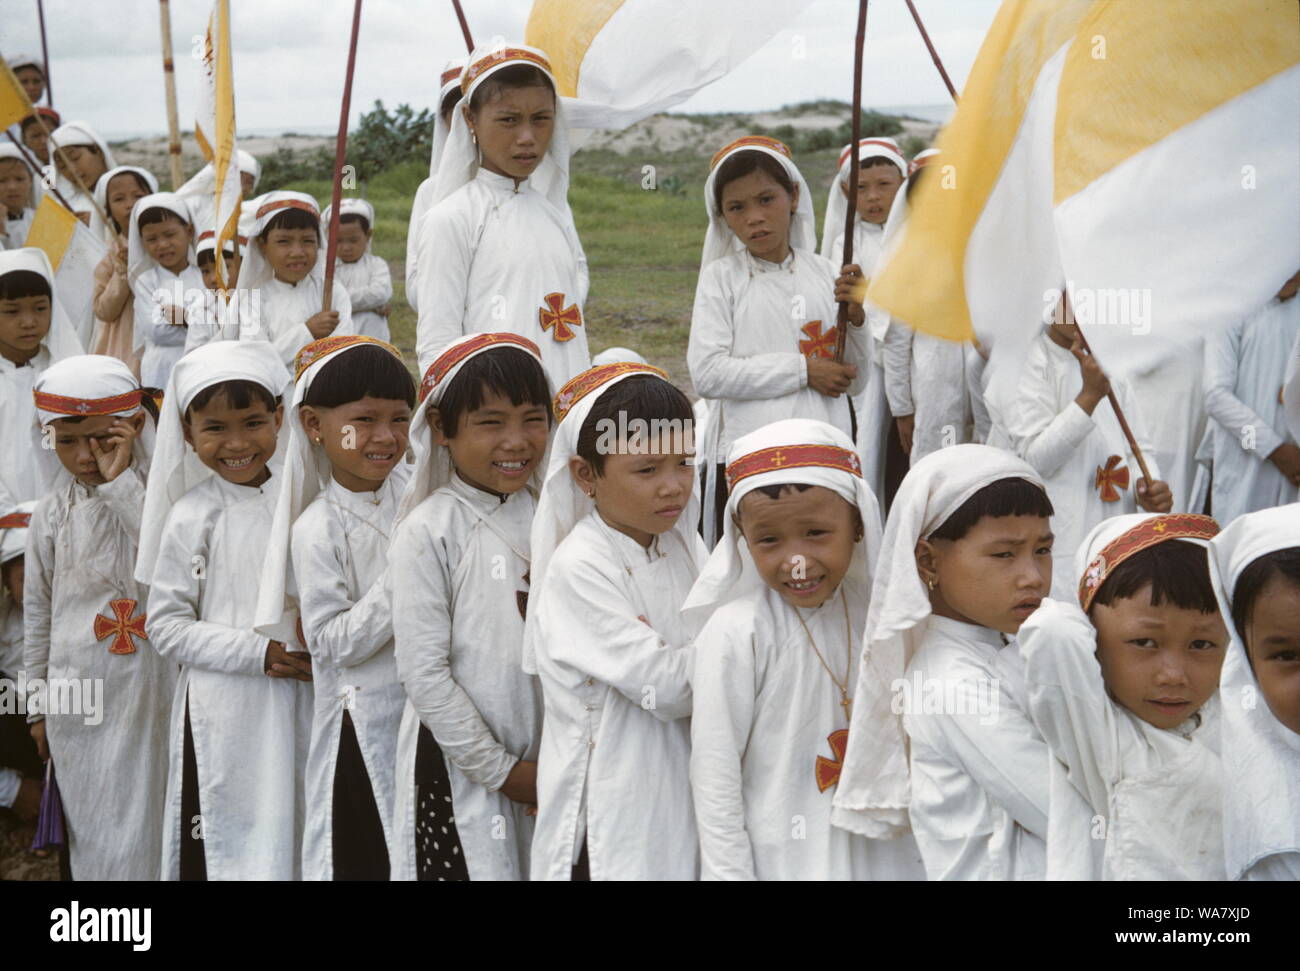 AJAXNETPHOTO. 1955 (APPROX). INDO CHINA. VIETNAM. (IN-COUNTRY LOCATION UNKNOWN.) - DRESSED IN WHITE - YOUNG CATHOLIC CHILDREN DRESSED IN WHITE ROBES AND HEADGEAR, TRADITIONAL VIETNAMESE COLOUR FOR MOURNING, IN A PROCESSION. PHOTO:JEAN CORRE/AJAXREF:1 JC1955 Stock Photo